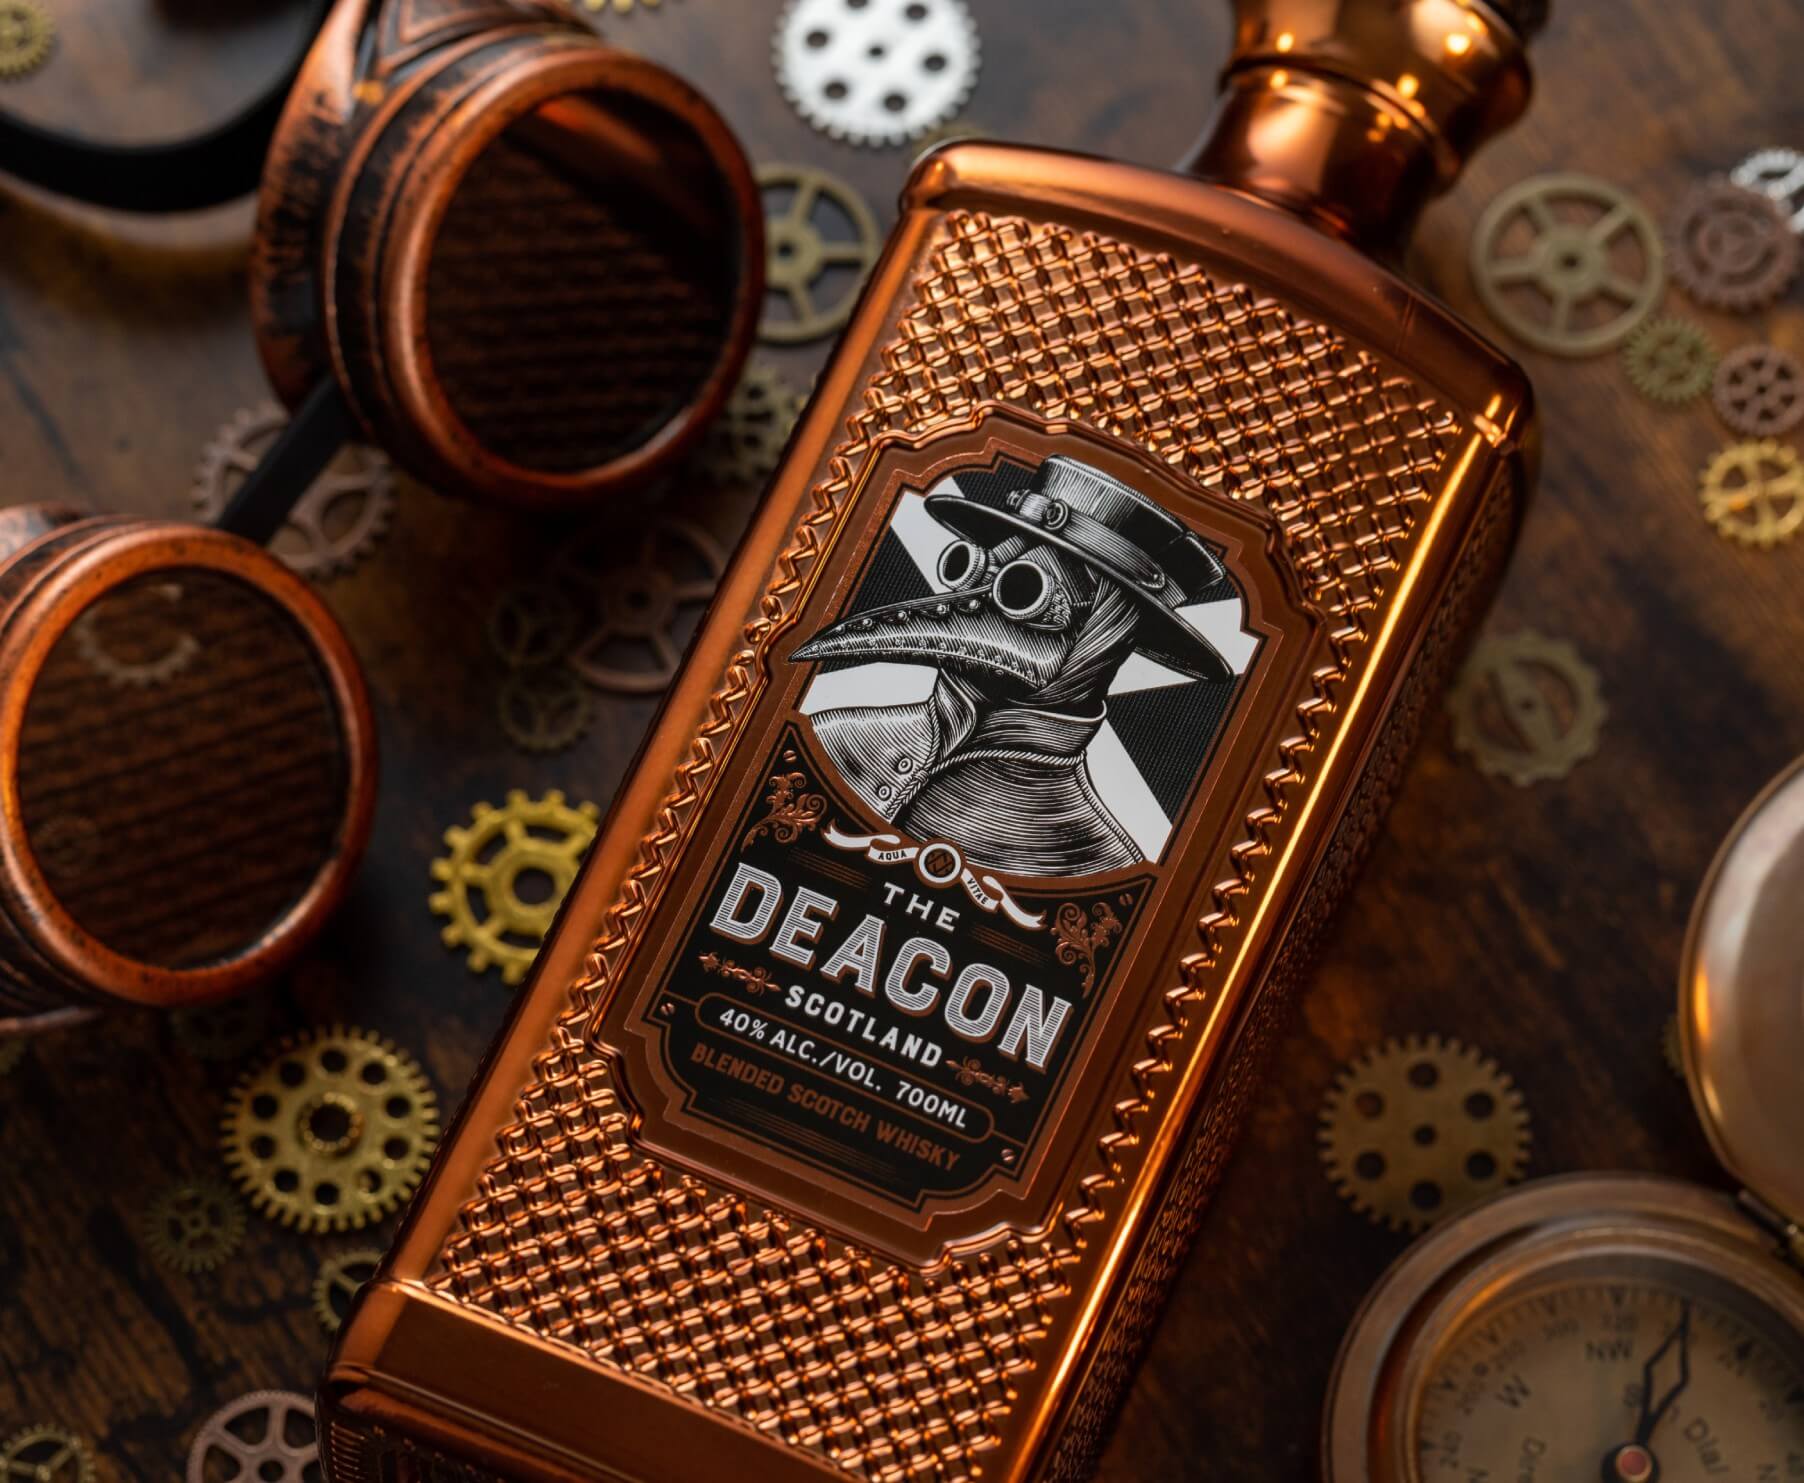 The Deacon Scotland Blended Scotch Whisky